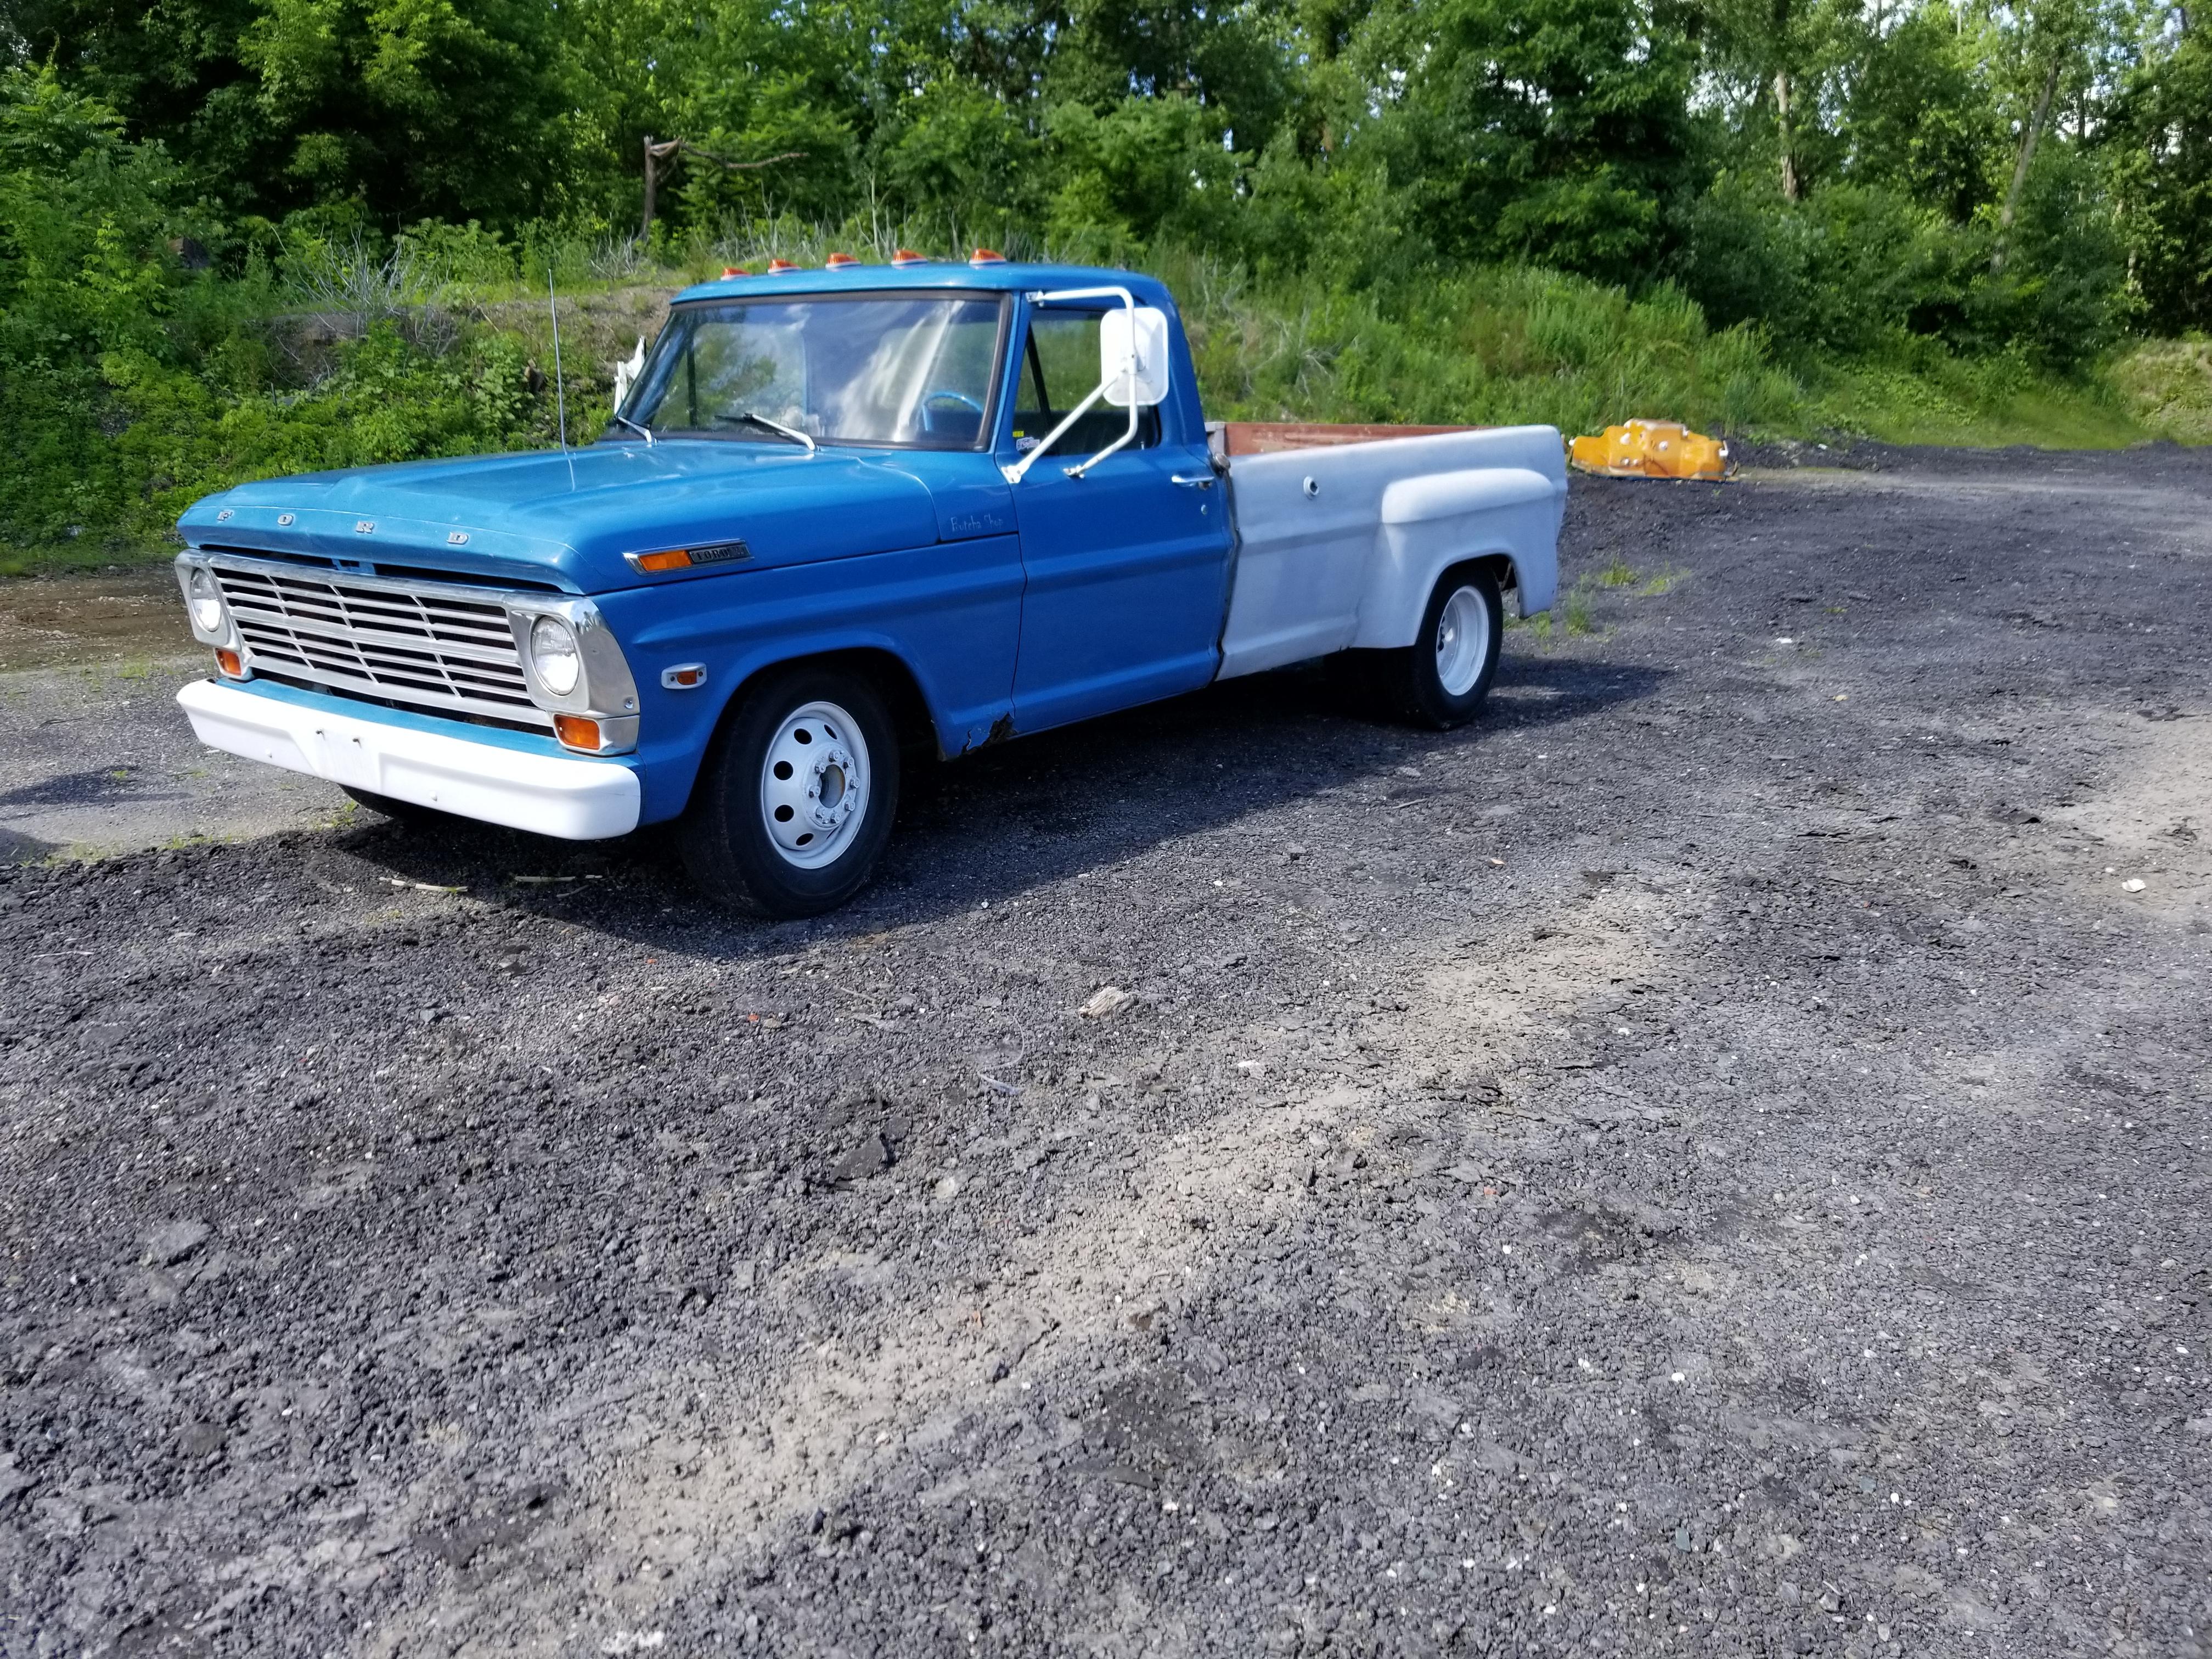 1969 f350 dually pickup project - Ford Truck Enthusiasts Forums